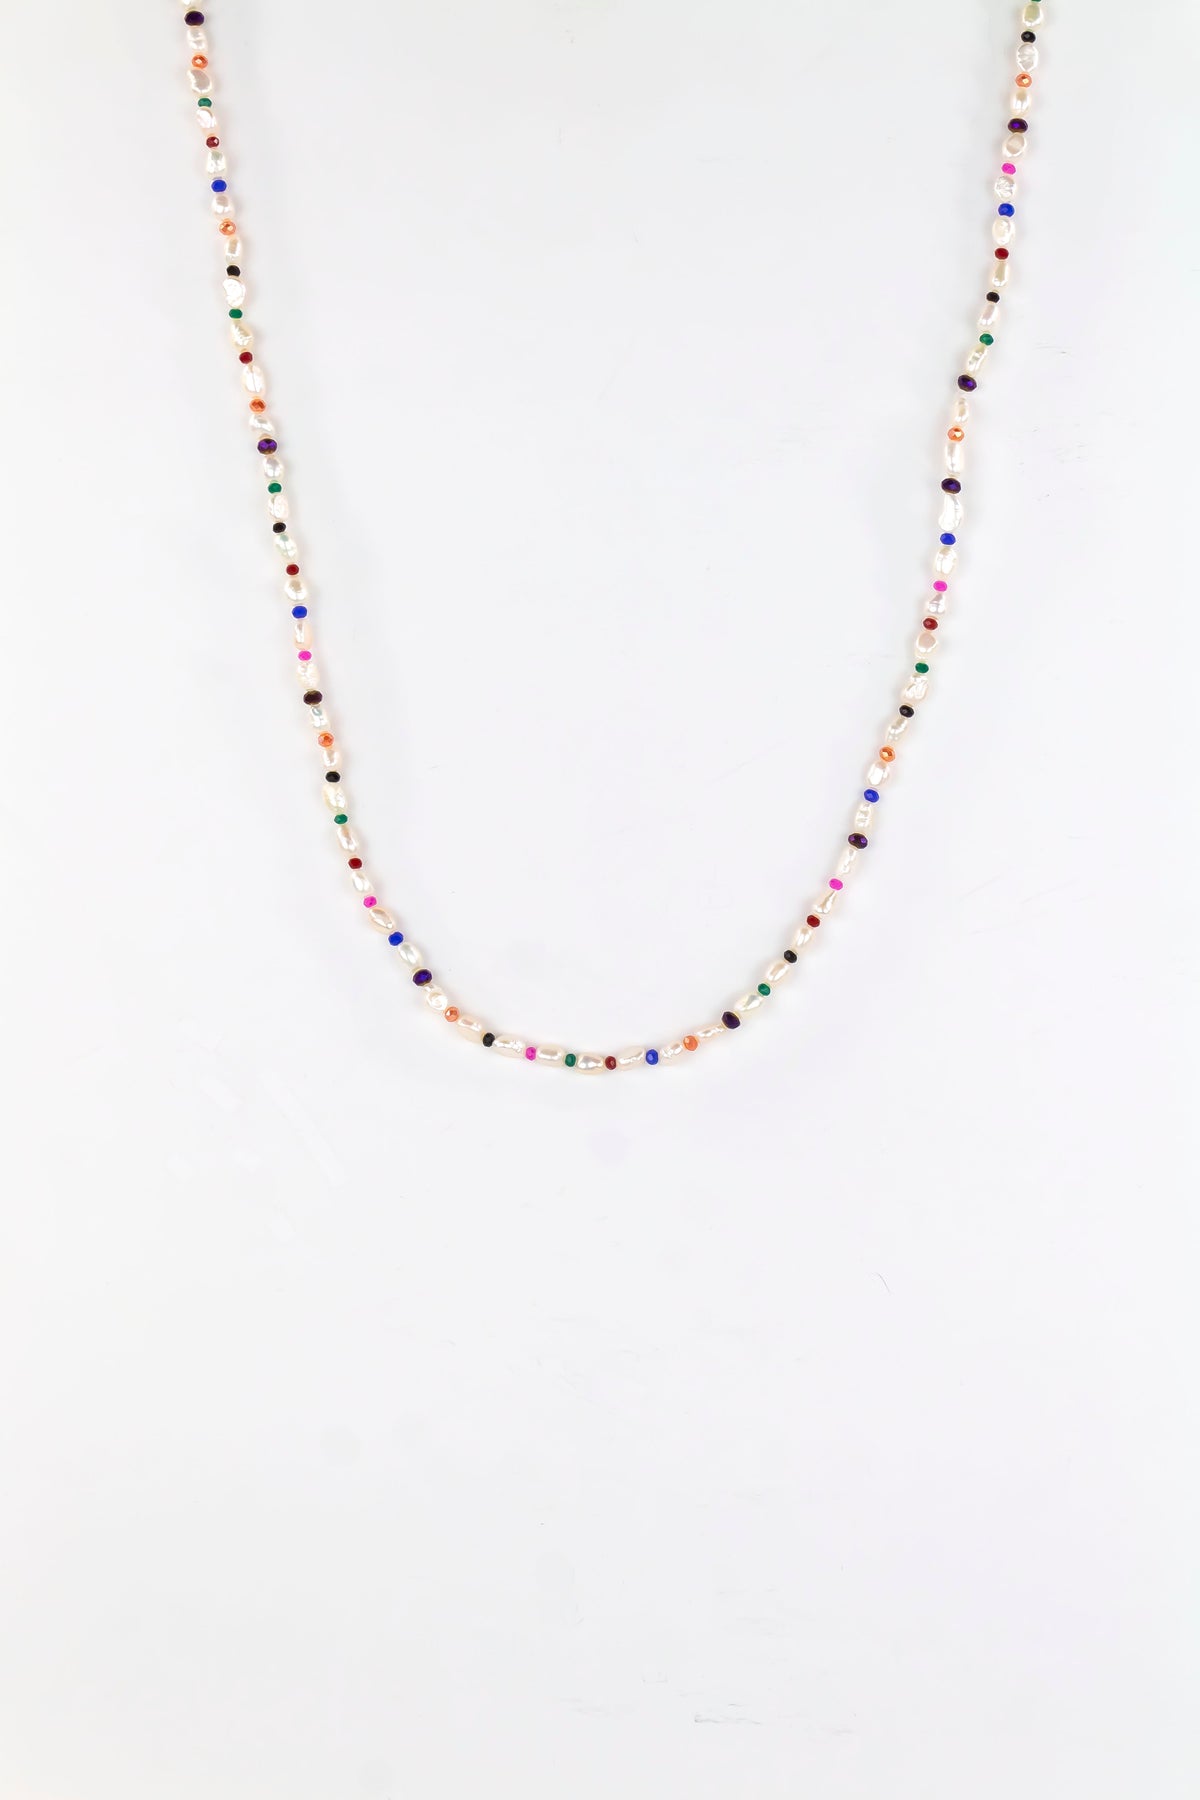 Dauplaise Jewelry - 28” Fresh Water Pearl Stretch